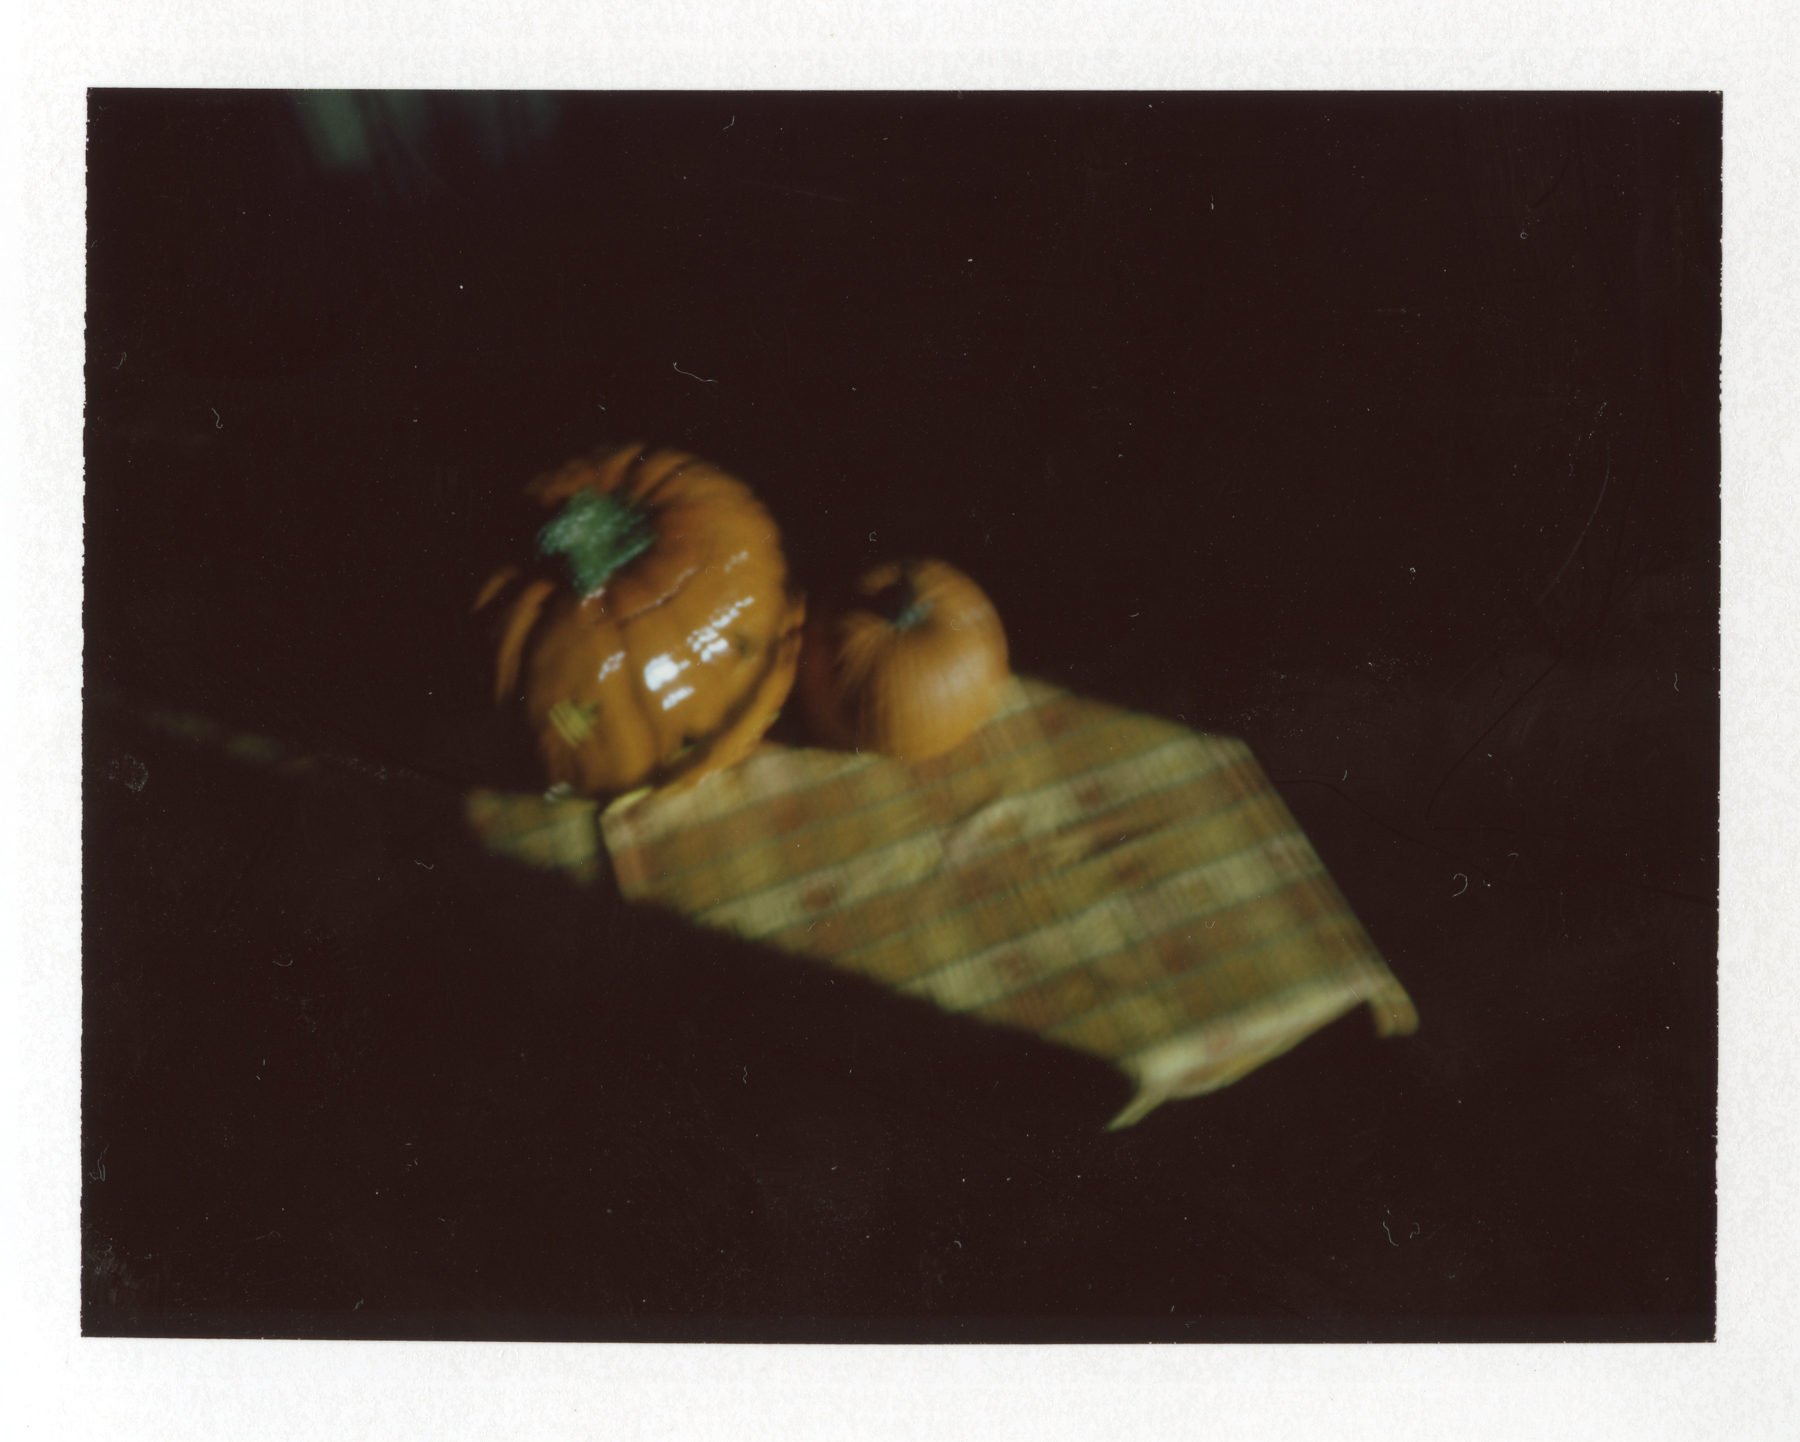 All images Polaroid Colorpack converted in pinhole, Fuji fp100C film